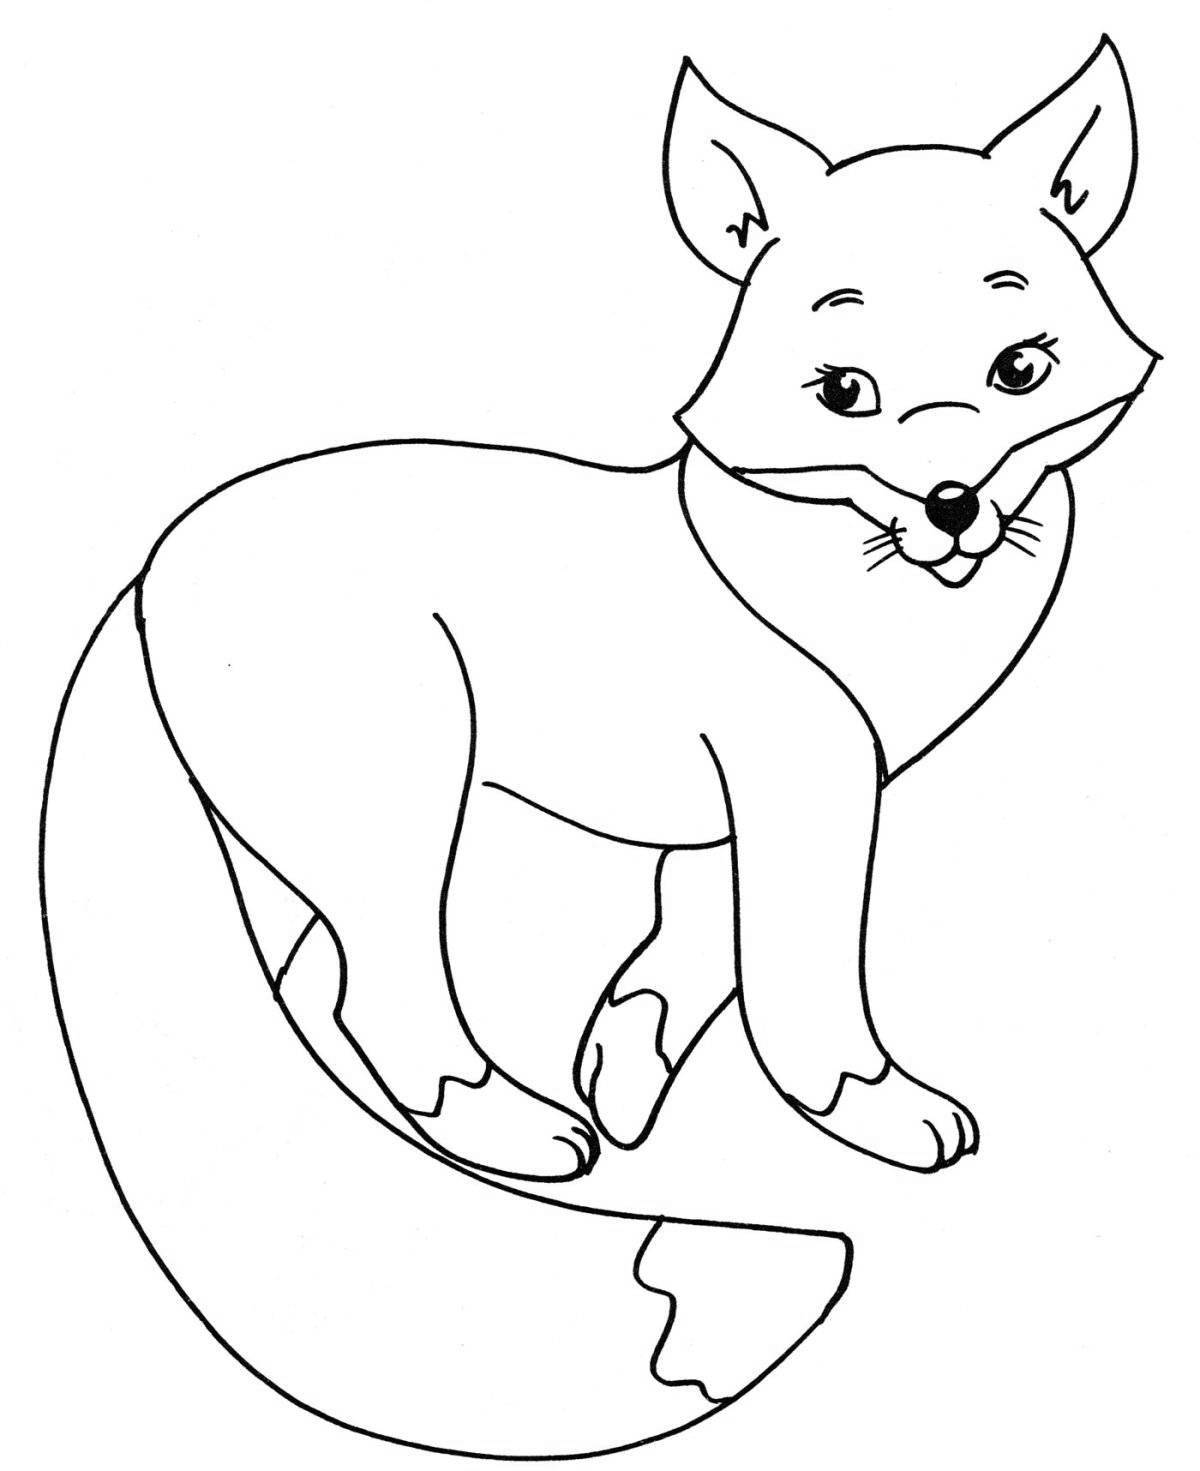 Colourful fox coloring book for 2-3 year olds